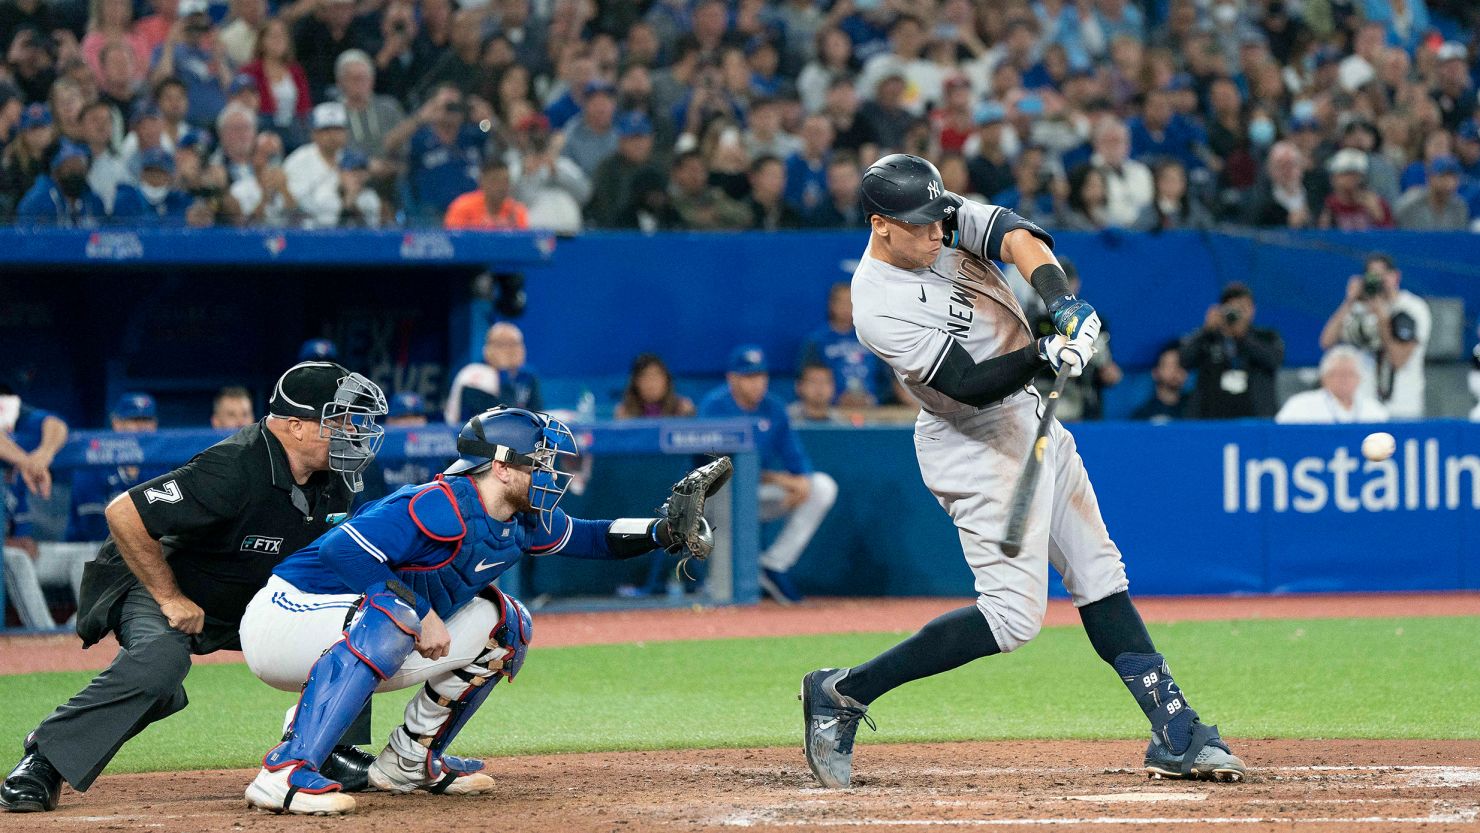 New York Yankees designated hitter Aaron Judge (99) hits his 61st home run scoring two runs against the Toronto Blue Jays during the seventh inning at Rogers Centre. 